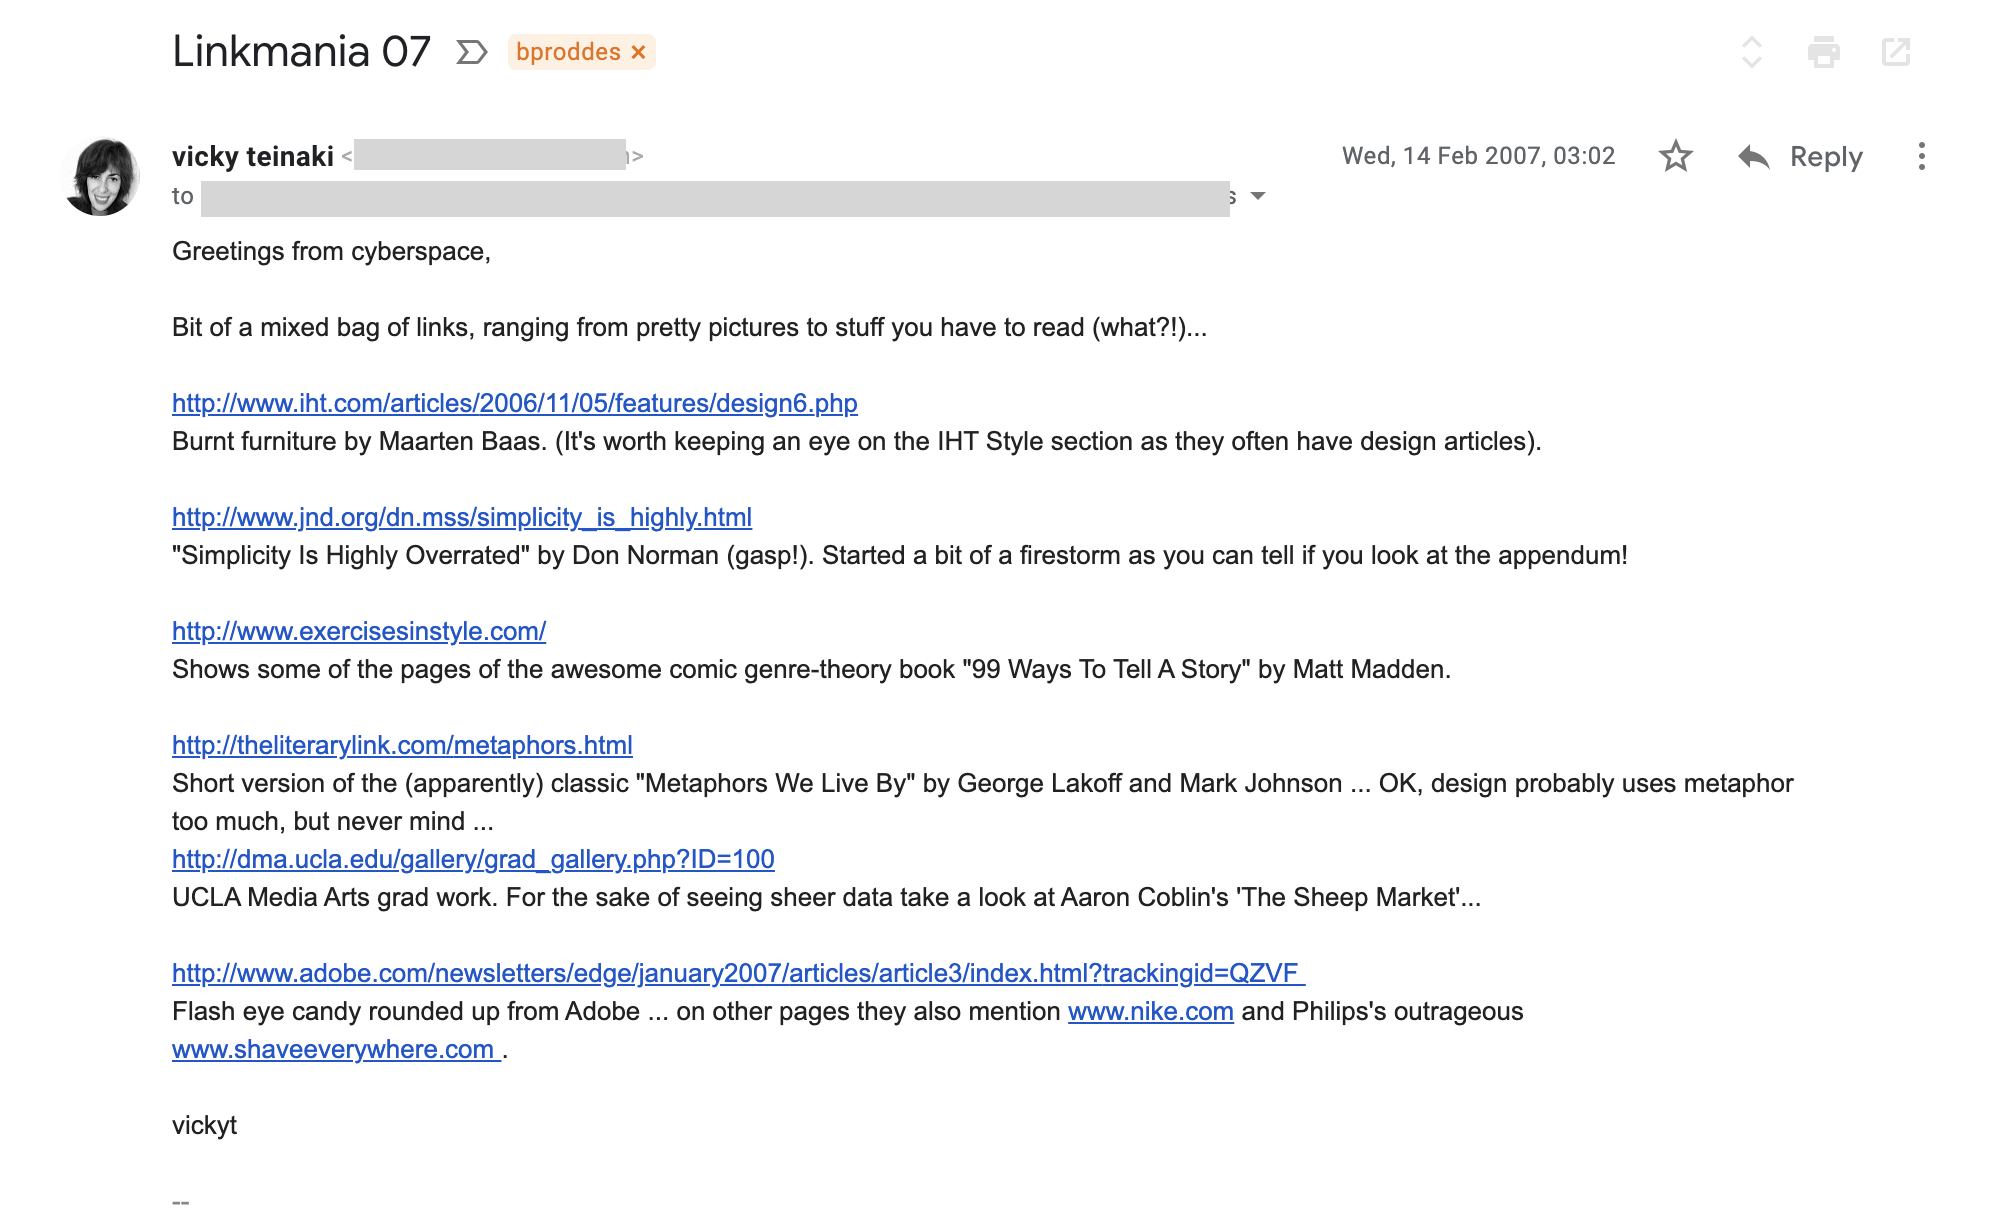 Example of email with links from 14 February 2007